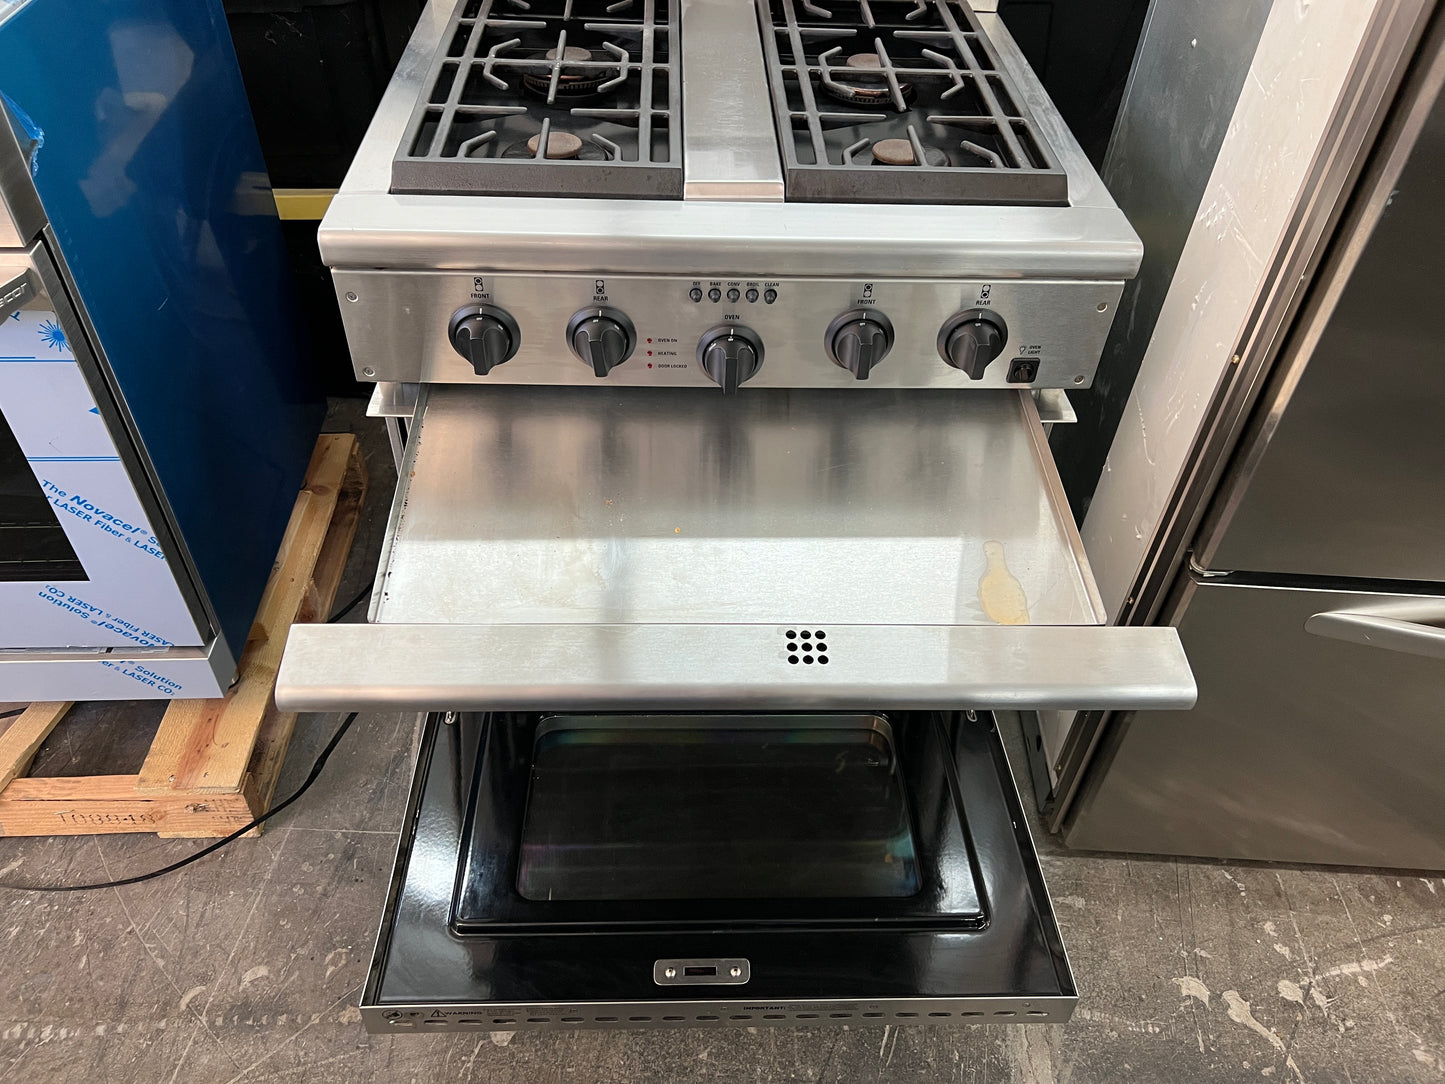 GE Monogram 30 Inch Commercial Gas Range Dual Fuel, Convection Oven, 4 Open Burners, ZDP30N4YSS Convection Oven, Stainless Steel, 369159